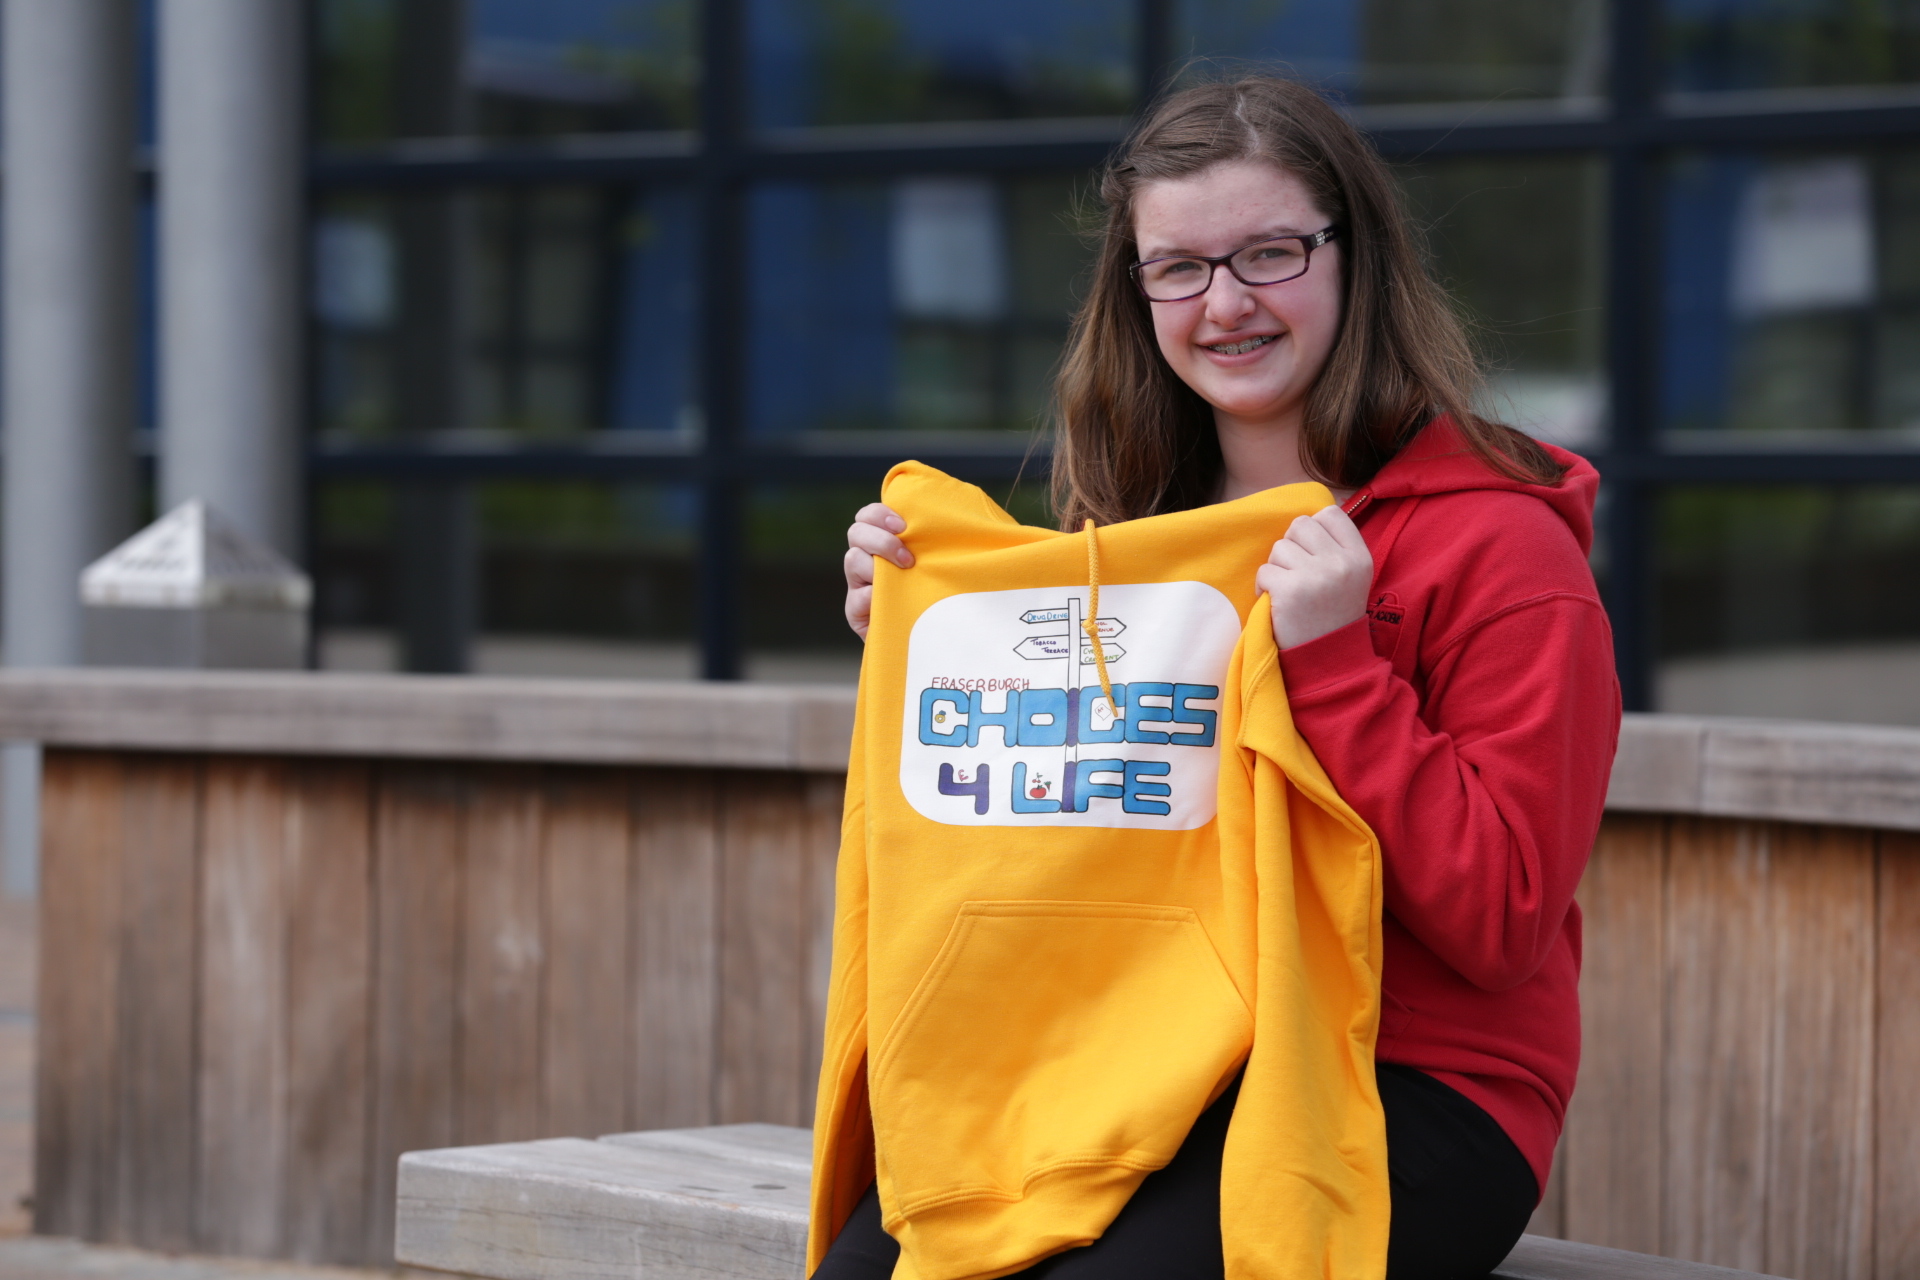 Georgia Morrison, 13,  designed the logo to be used on branding for future events